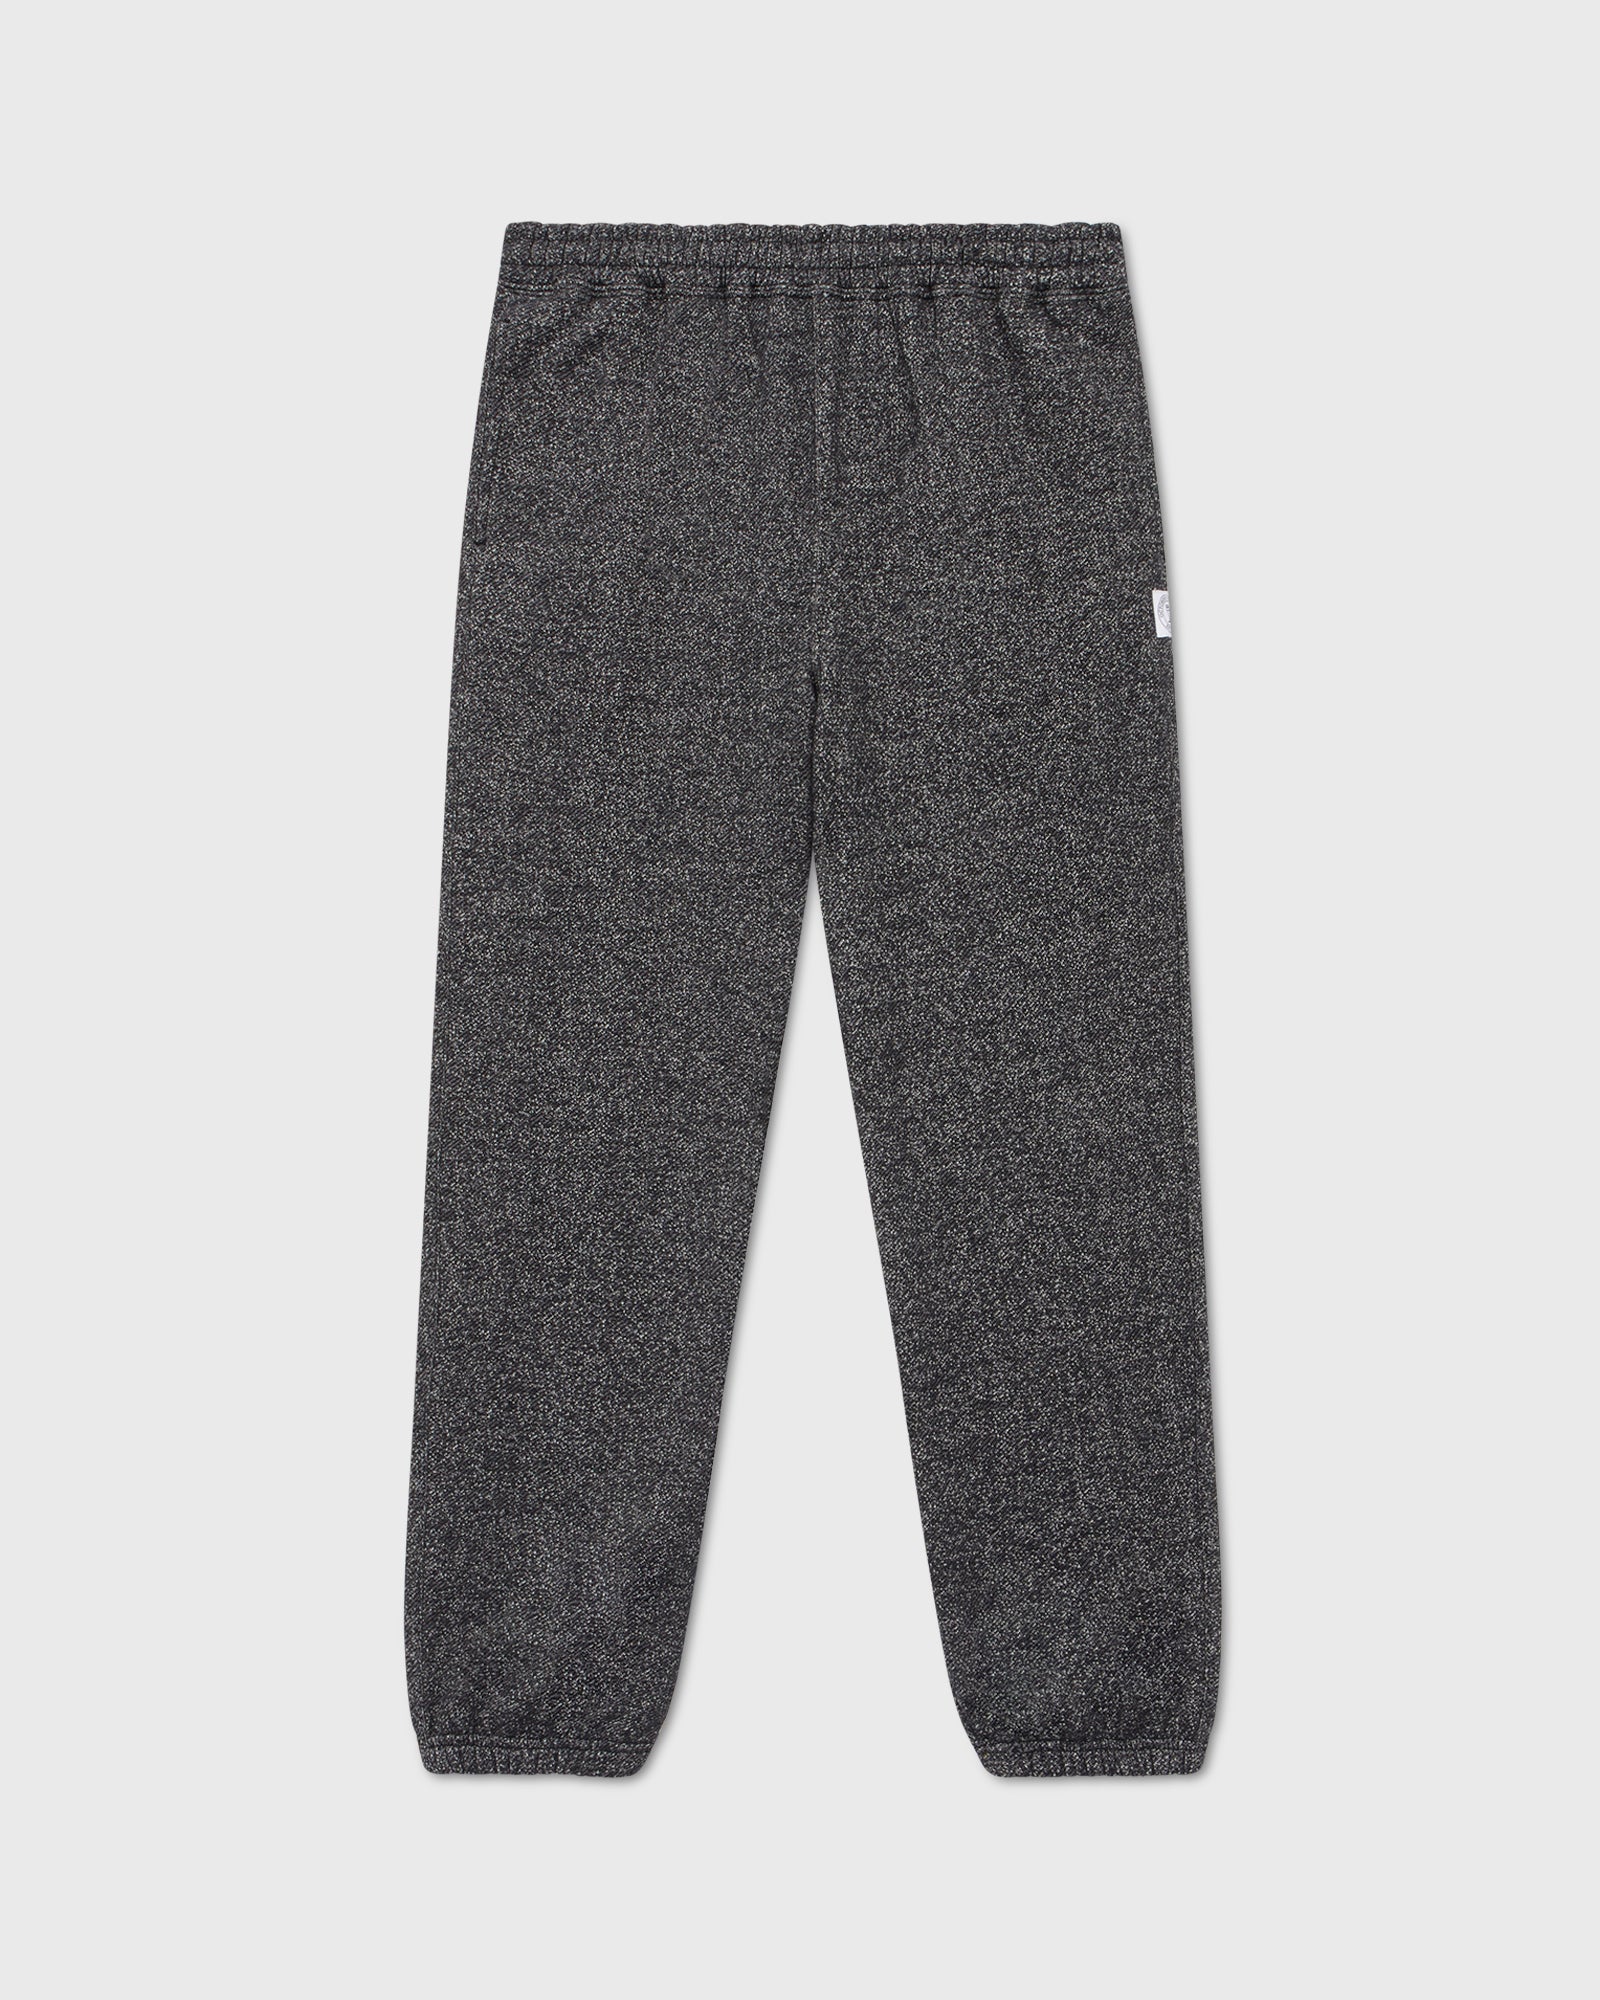 Speckle Fleece Relaxed Fit Sweatpant - Black IMAGE #1